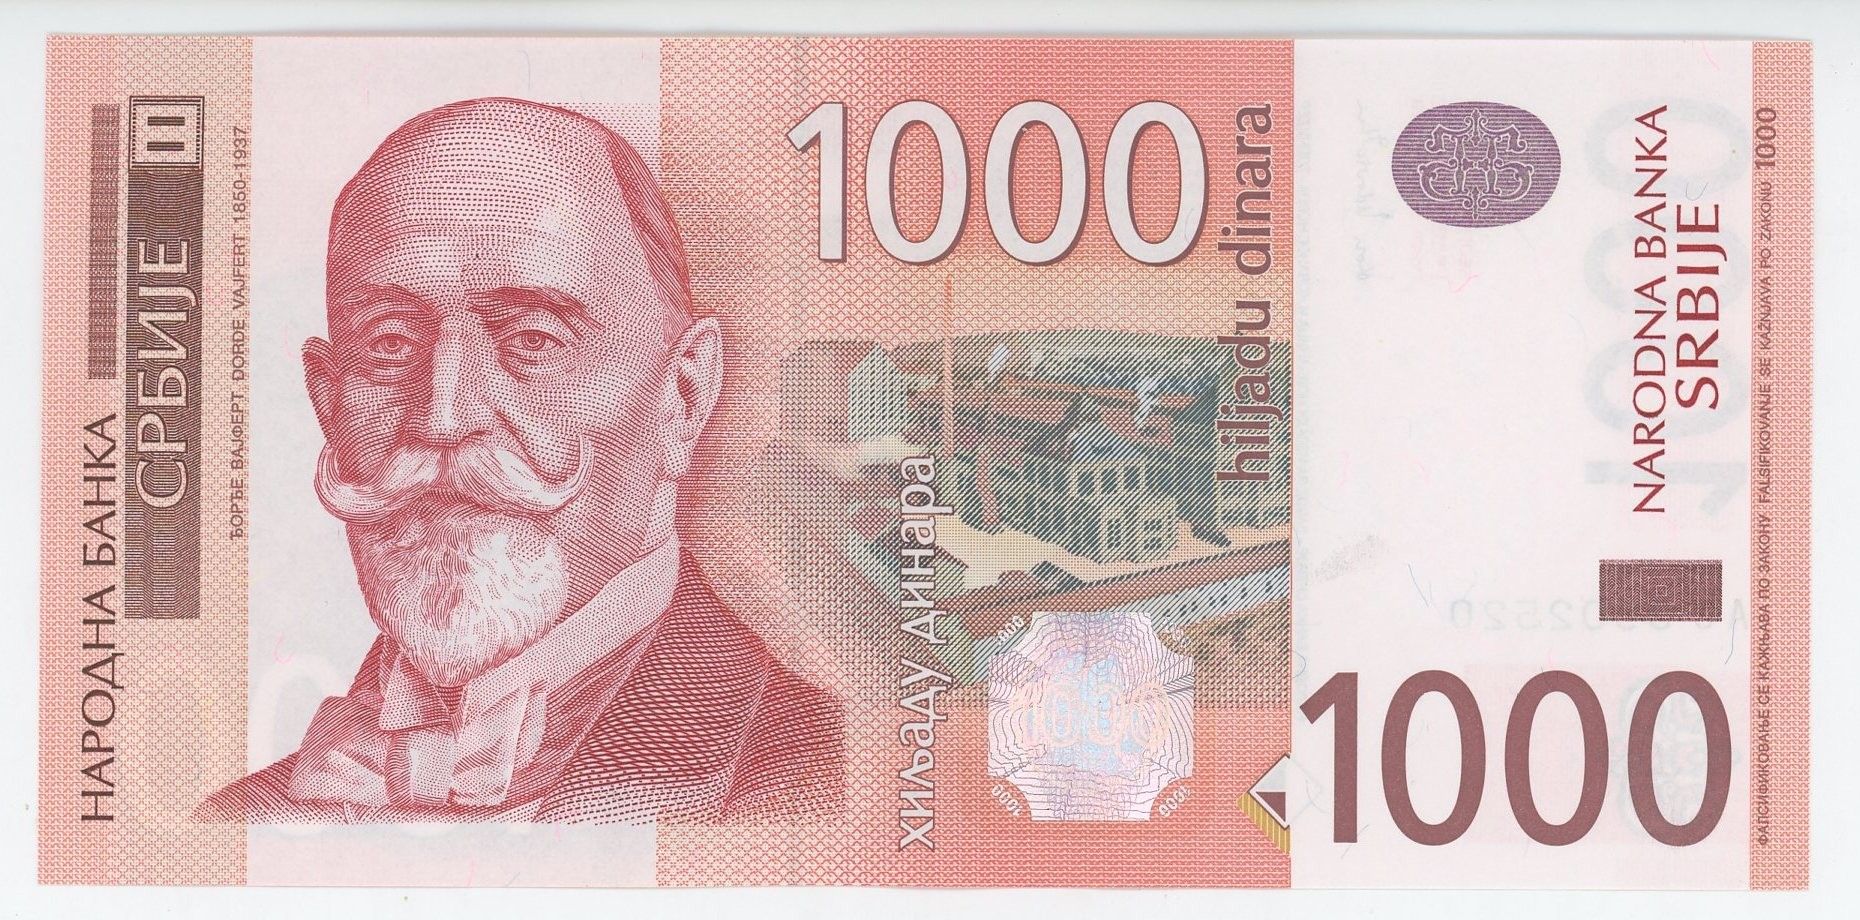 Currency of Serbia